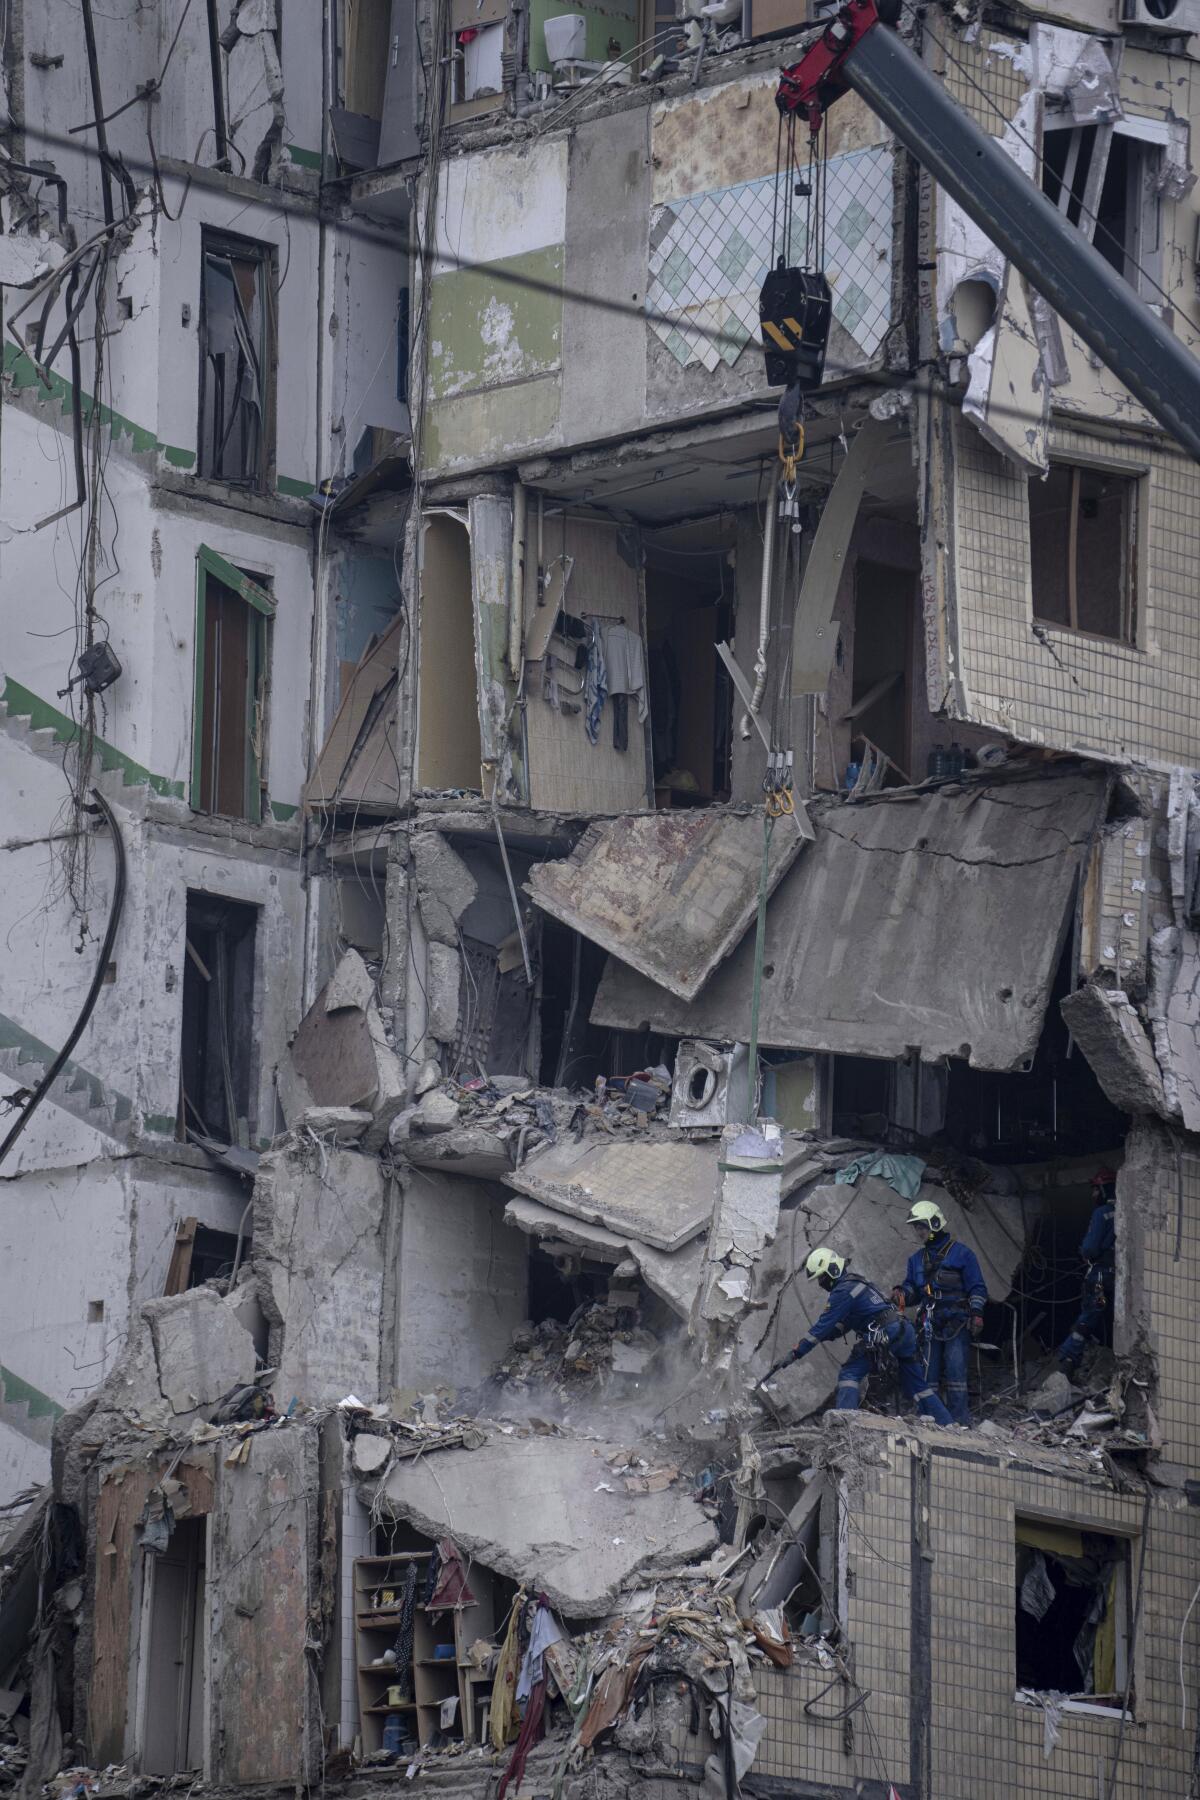 Two workers stand in a destroyed apartment building.